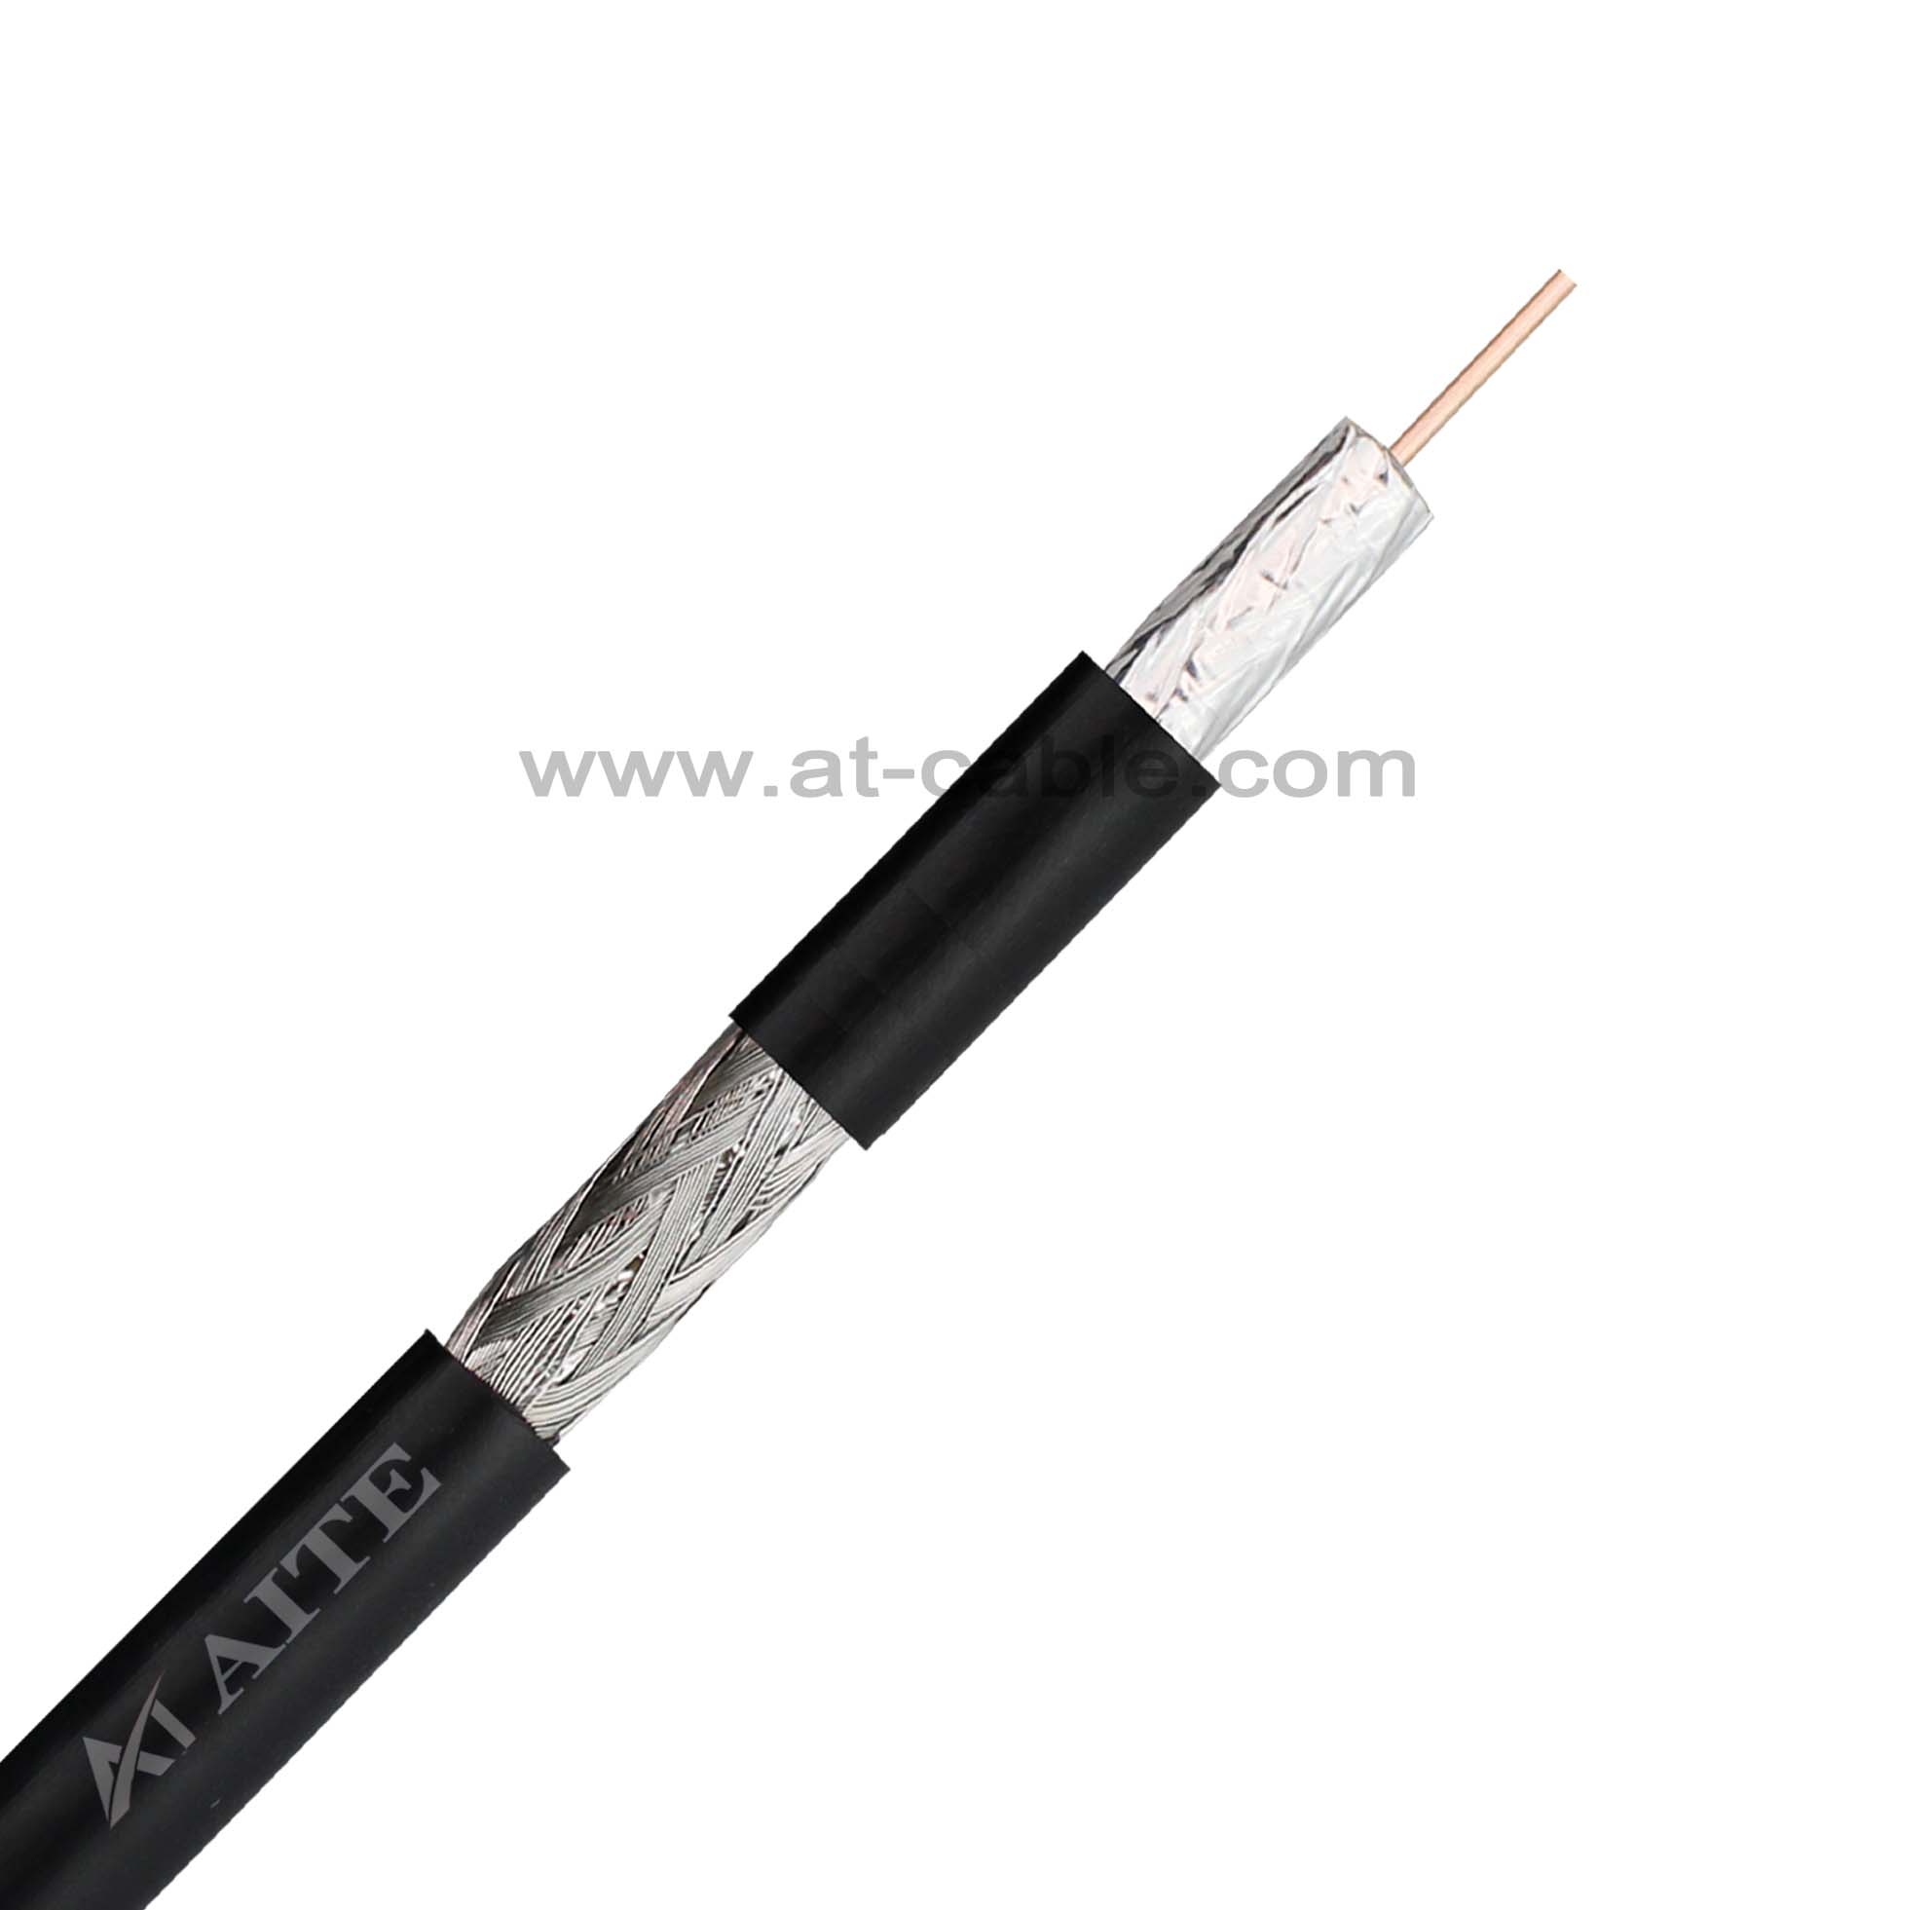  LMR 300 Coaxial cable